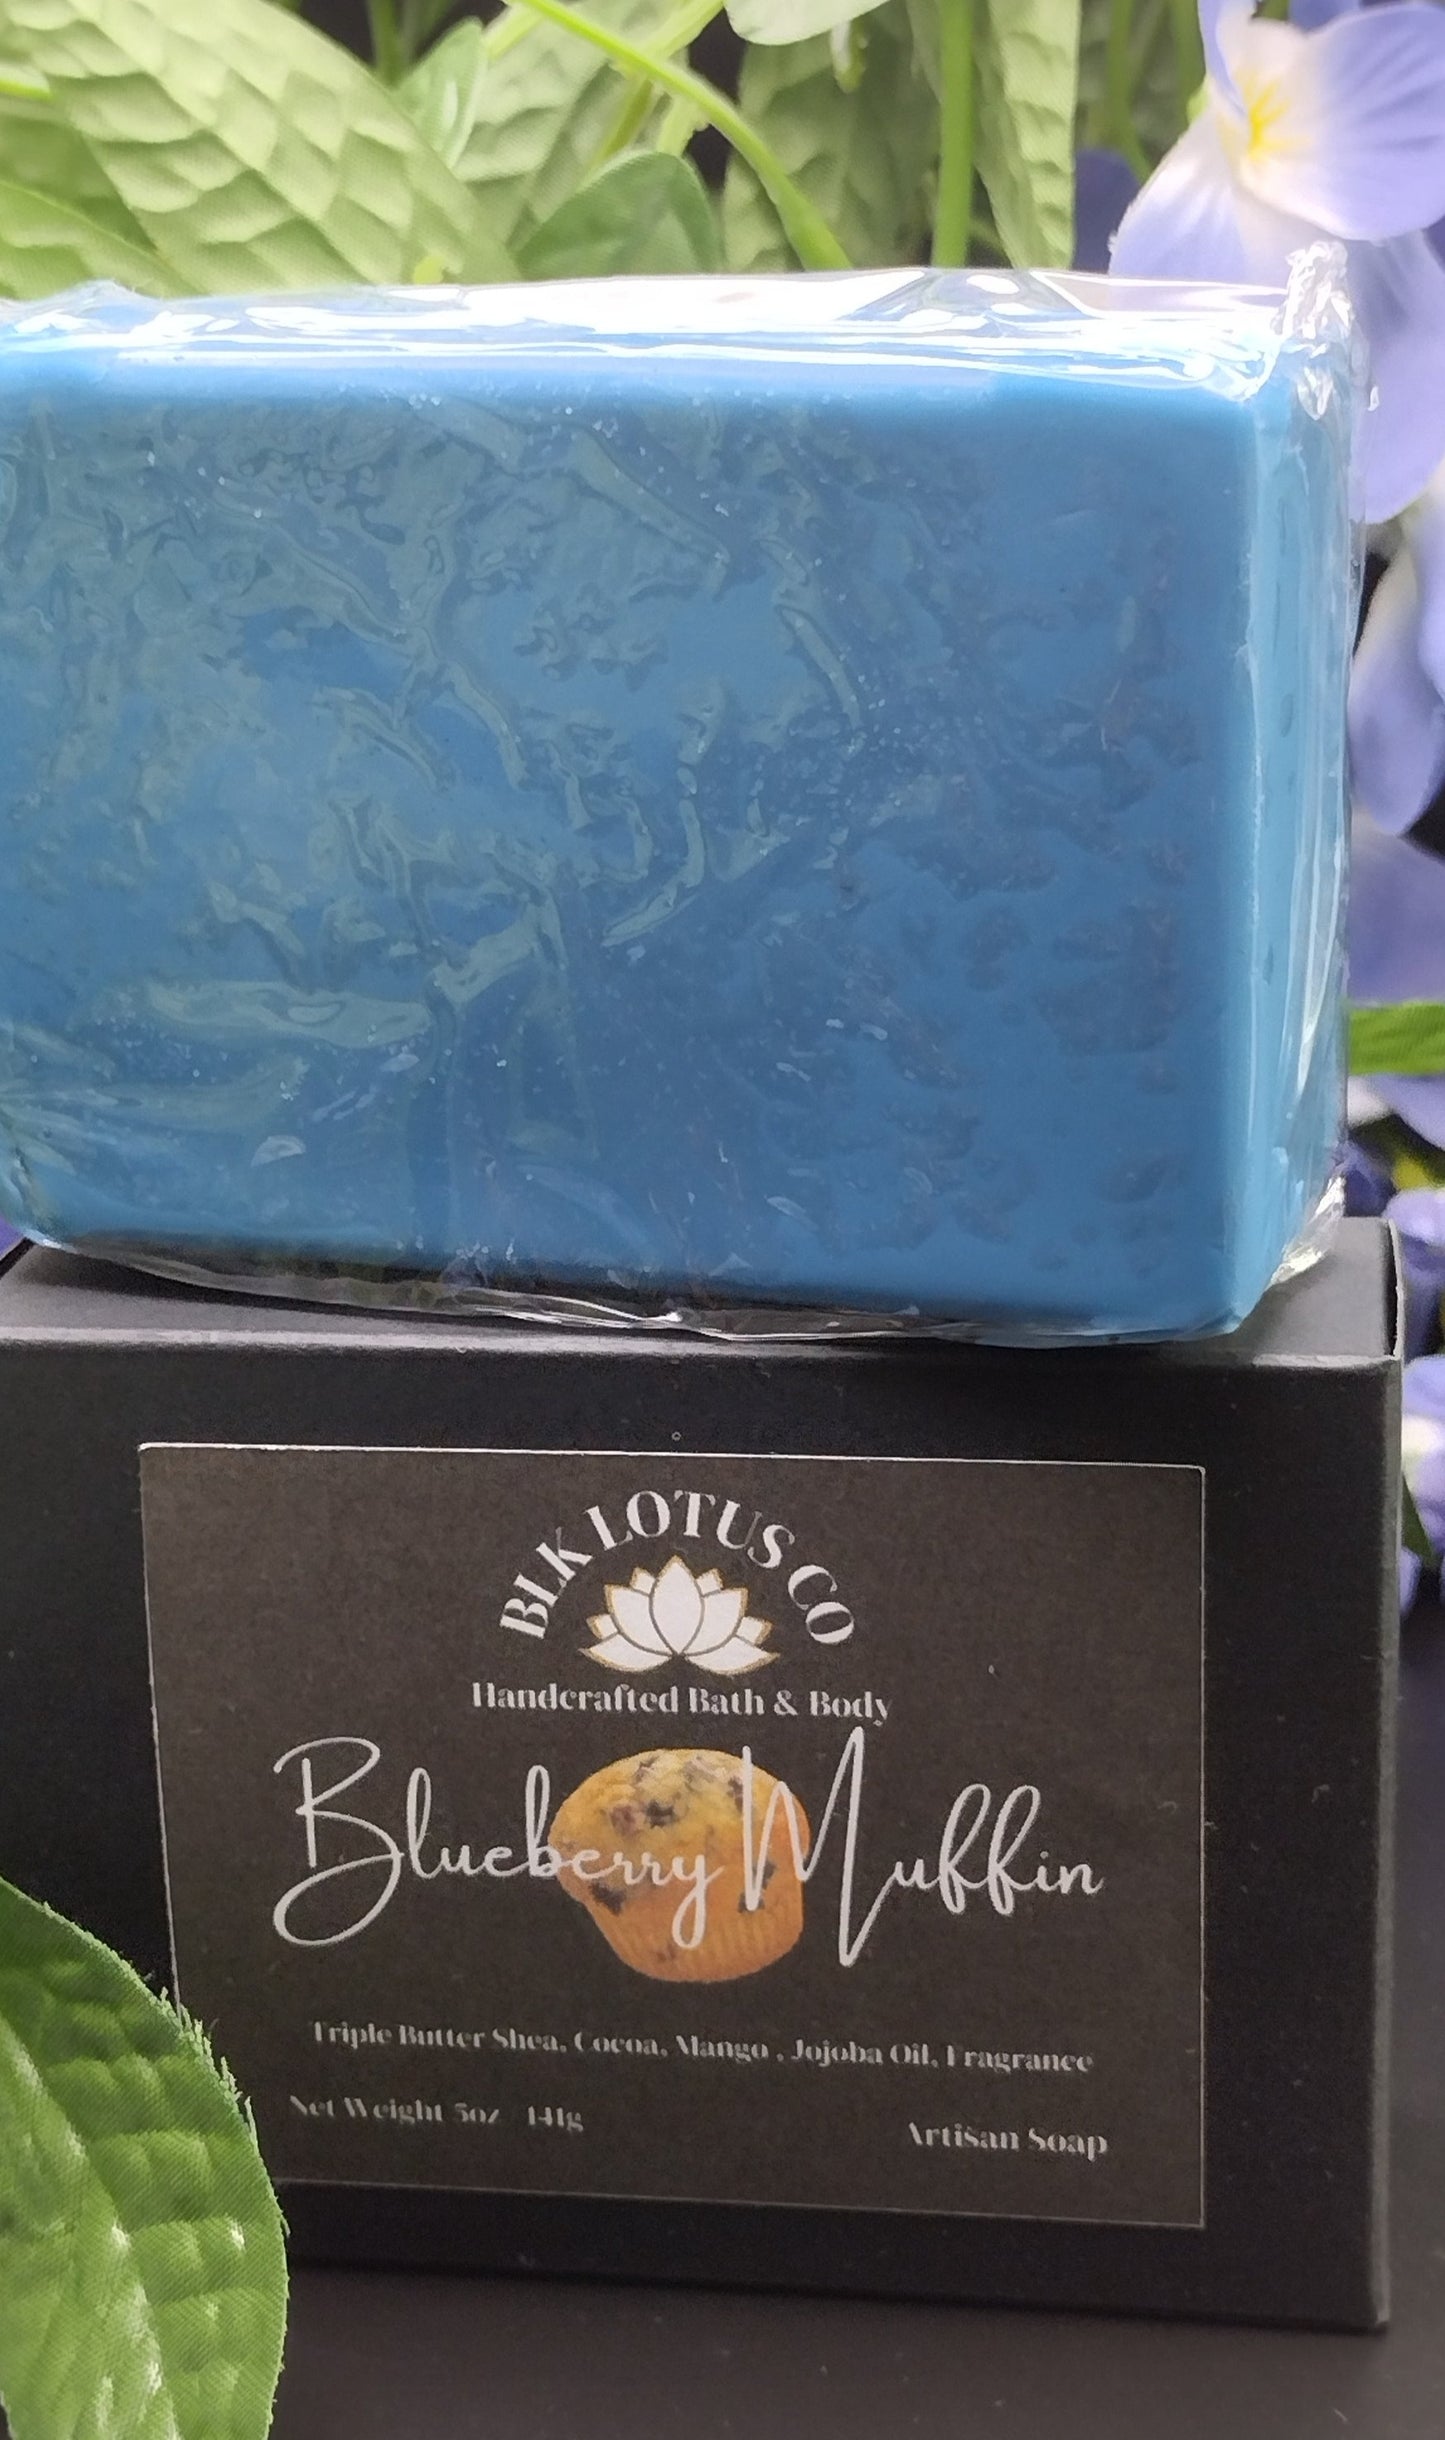 Blk Lotus Co 5oz Blueberry Muffin Handcrafted Triple Butter Shea, Mango, and Cocoa Butter Soap